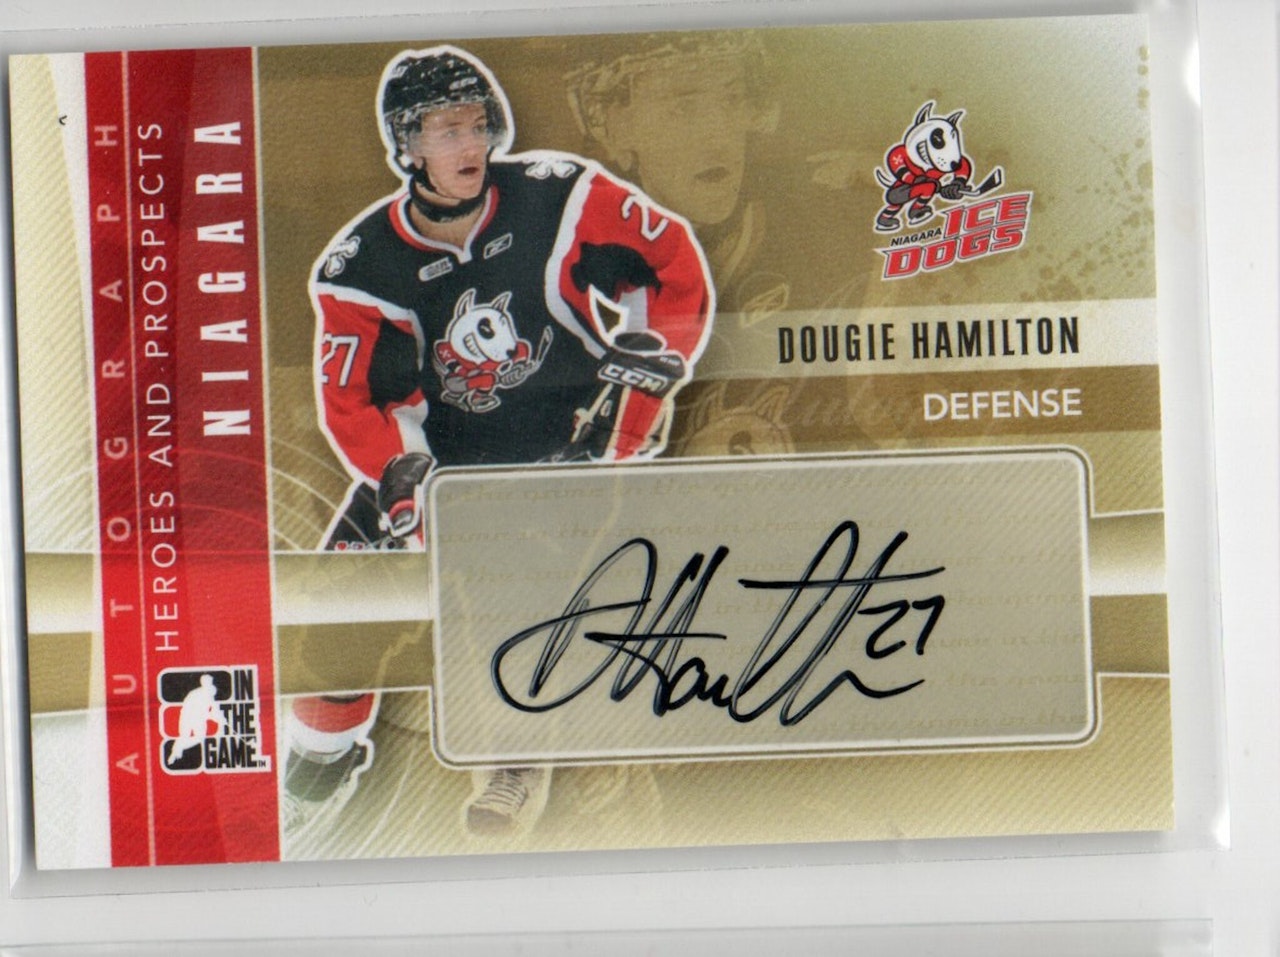 2011-12 ITG Heroes and Prospects Autographs #ADH Dougie Hamilton (150-X357-BRUINS)